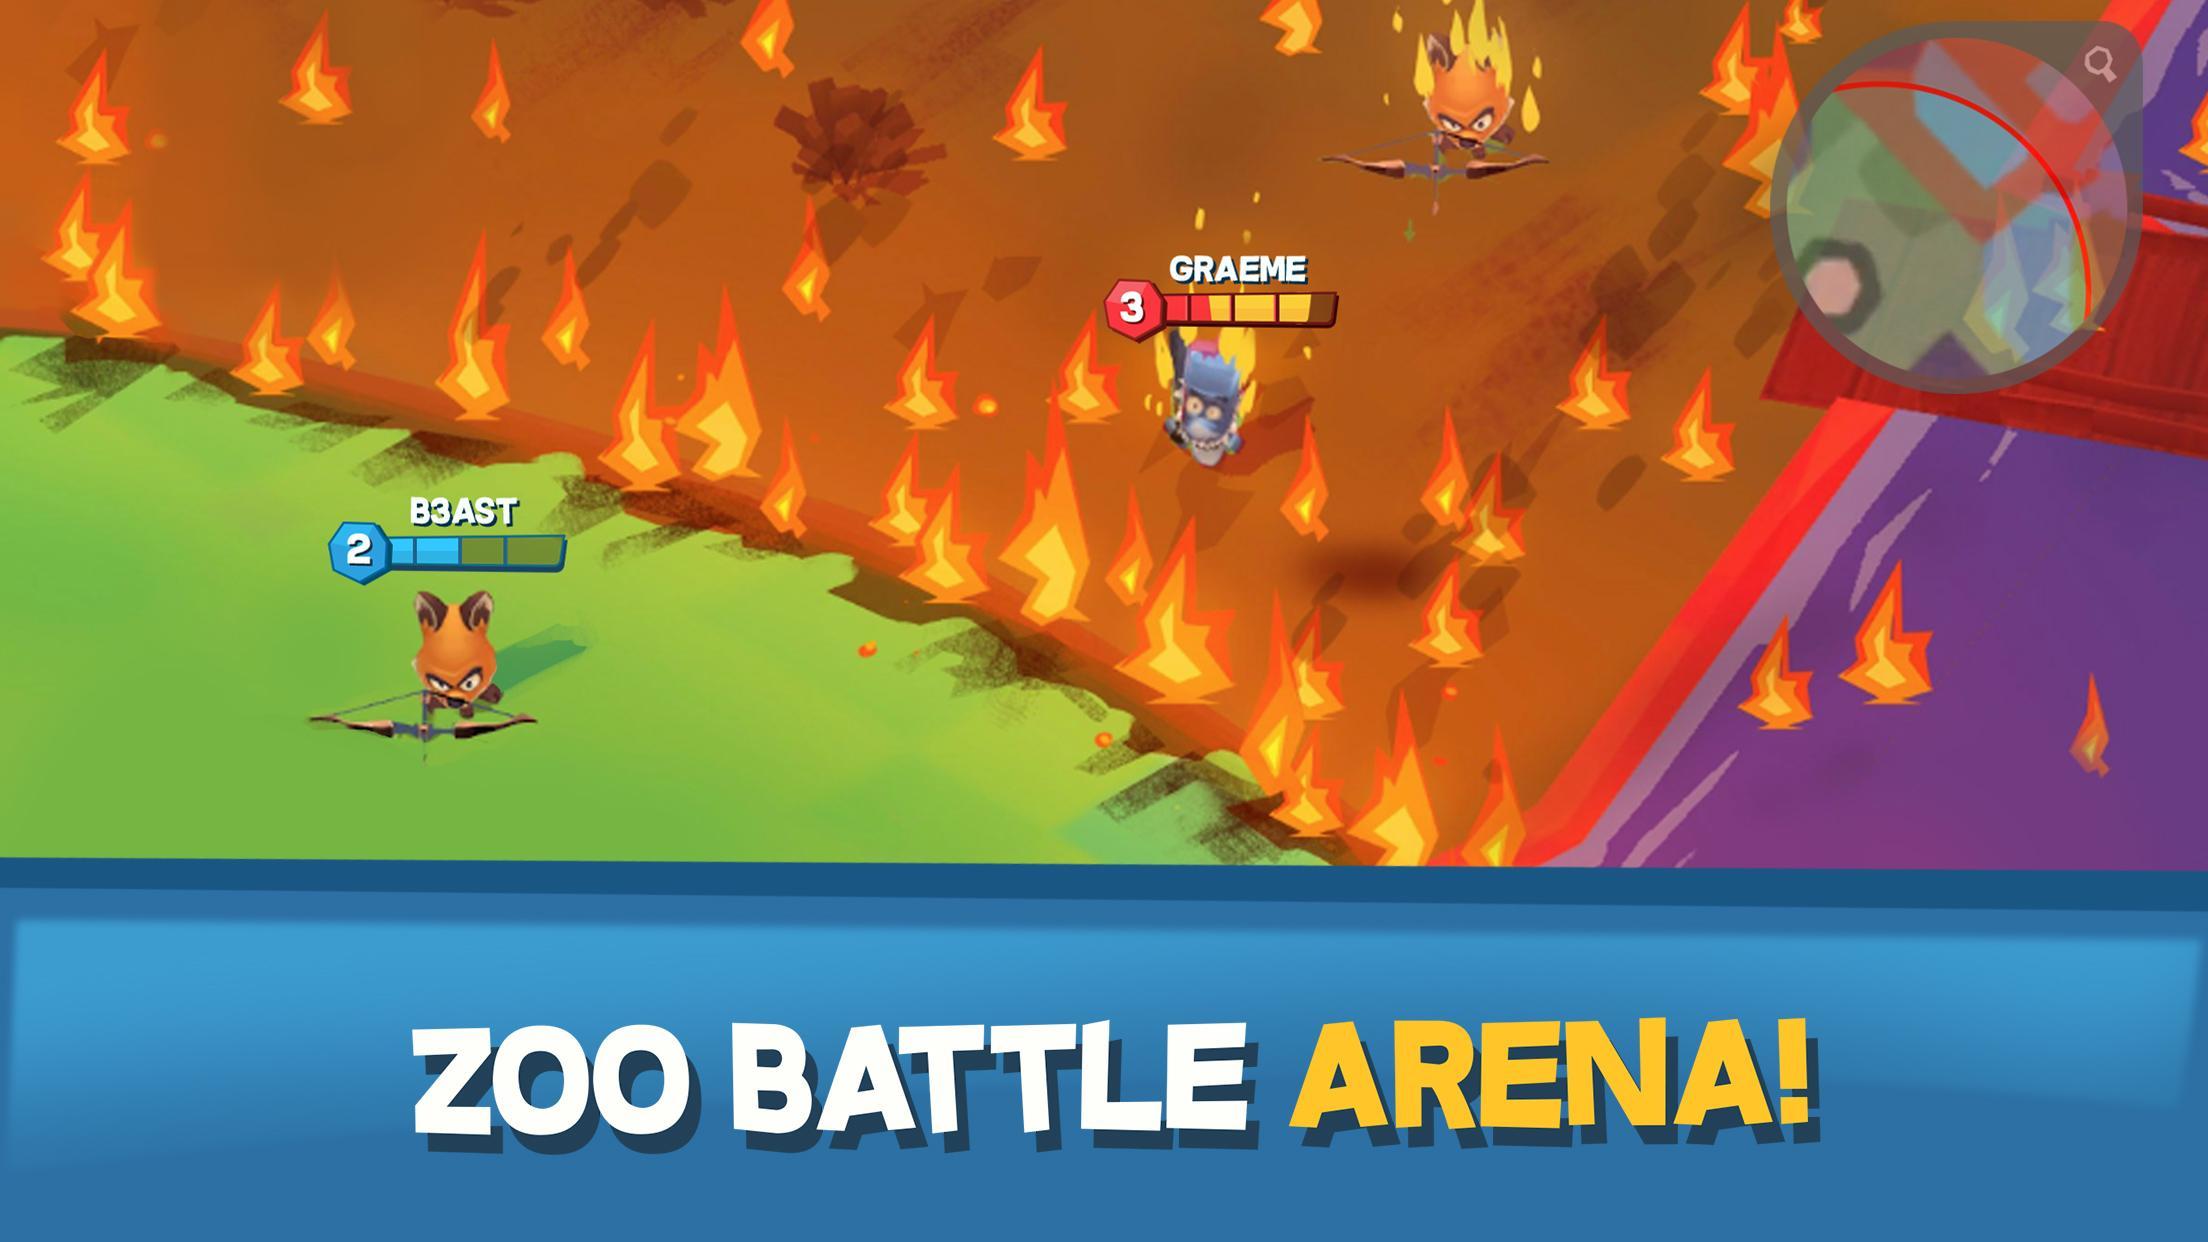 Zooba Free-for-all Zoo Combat Battle Royale Games 2.6 Screenshot 5